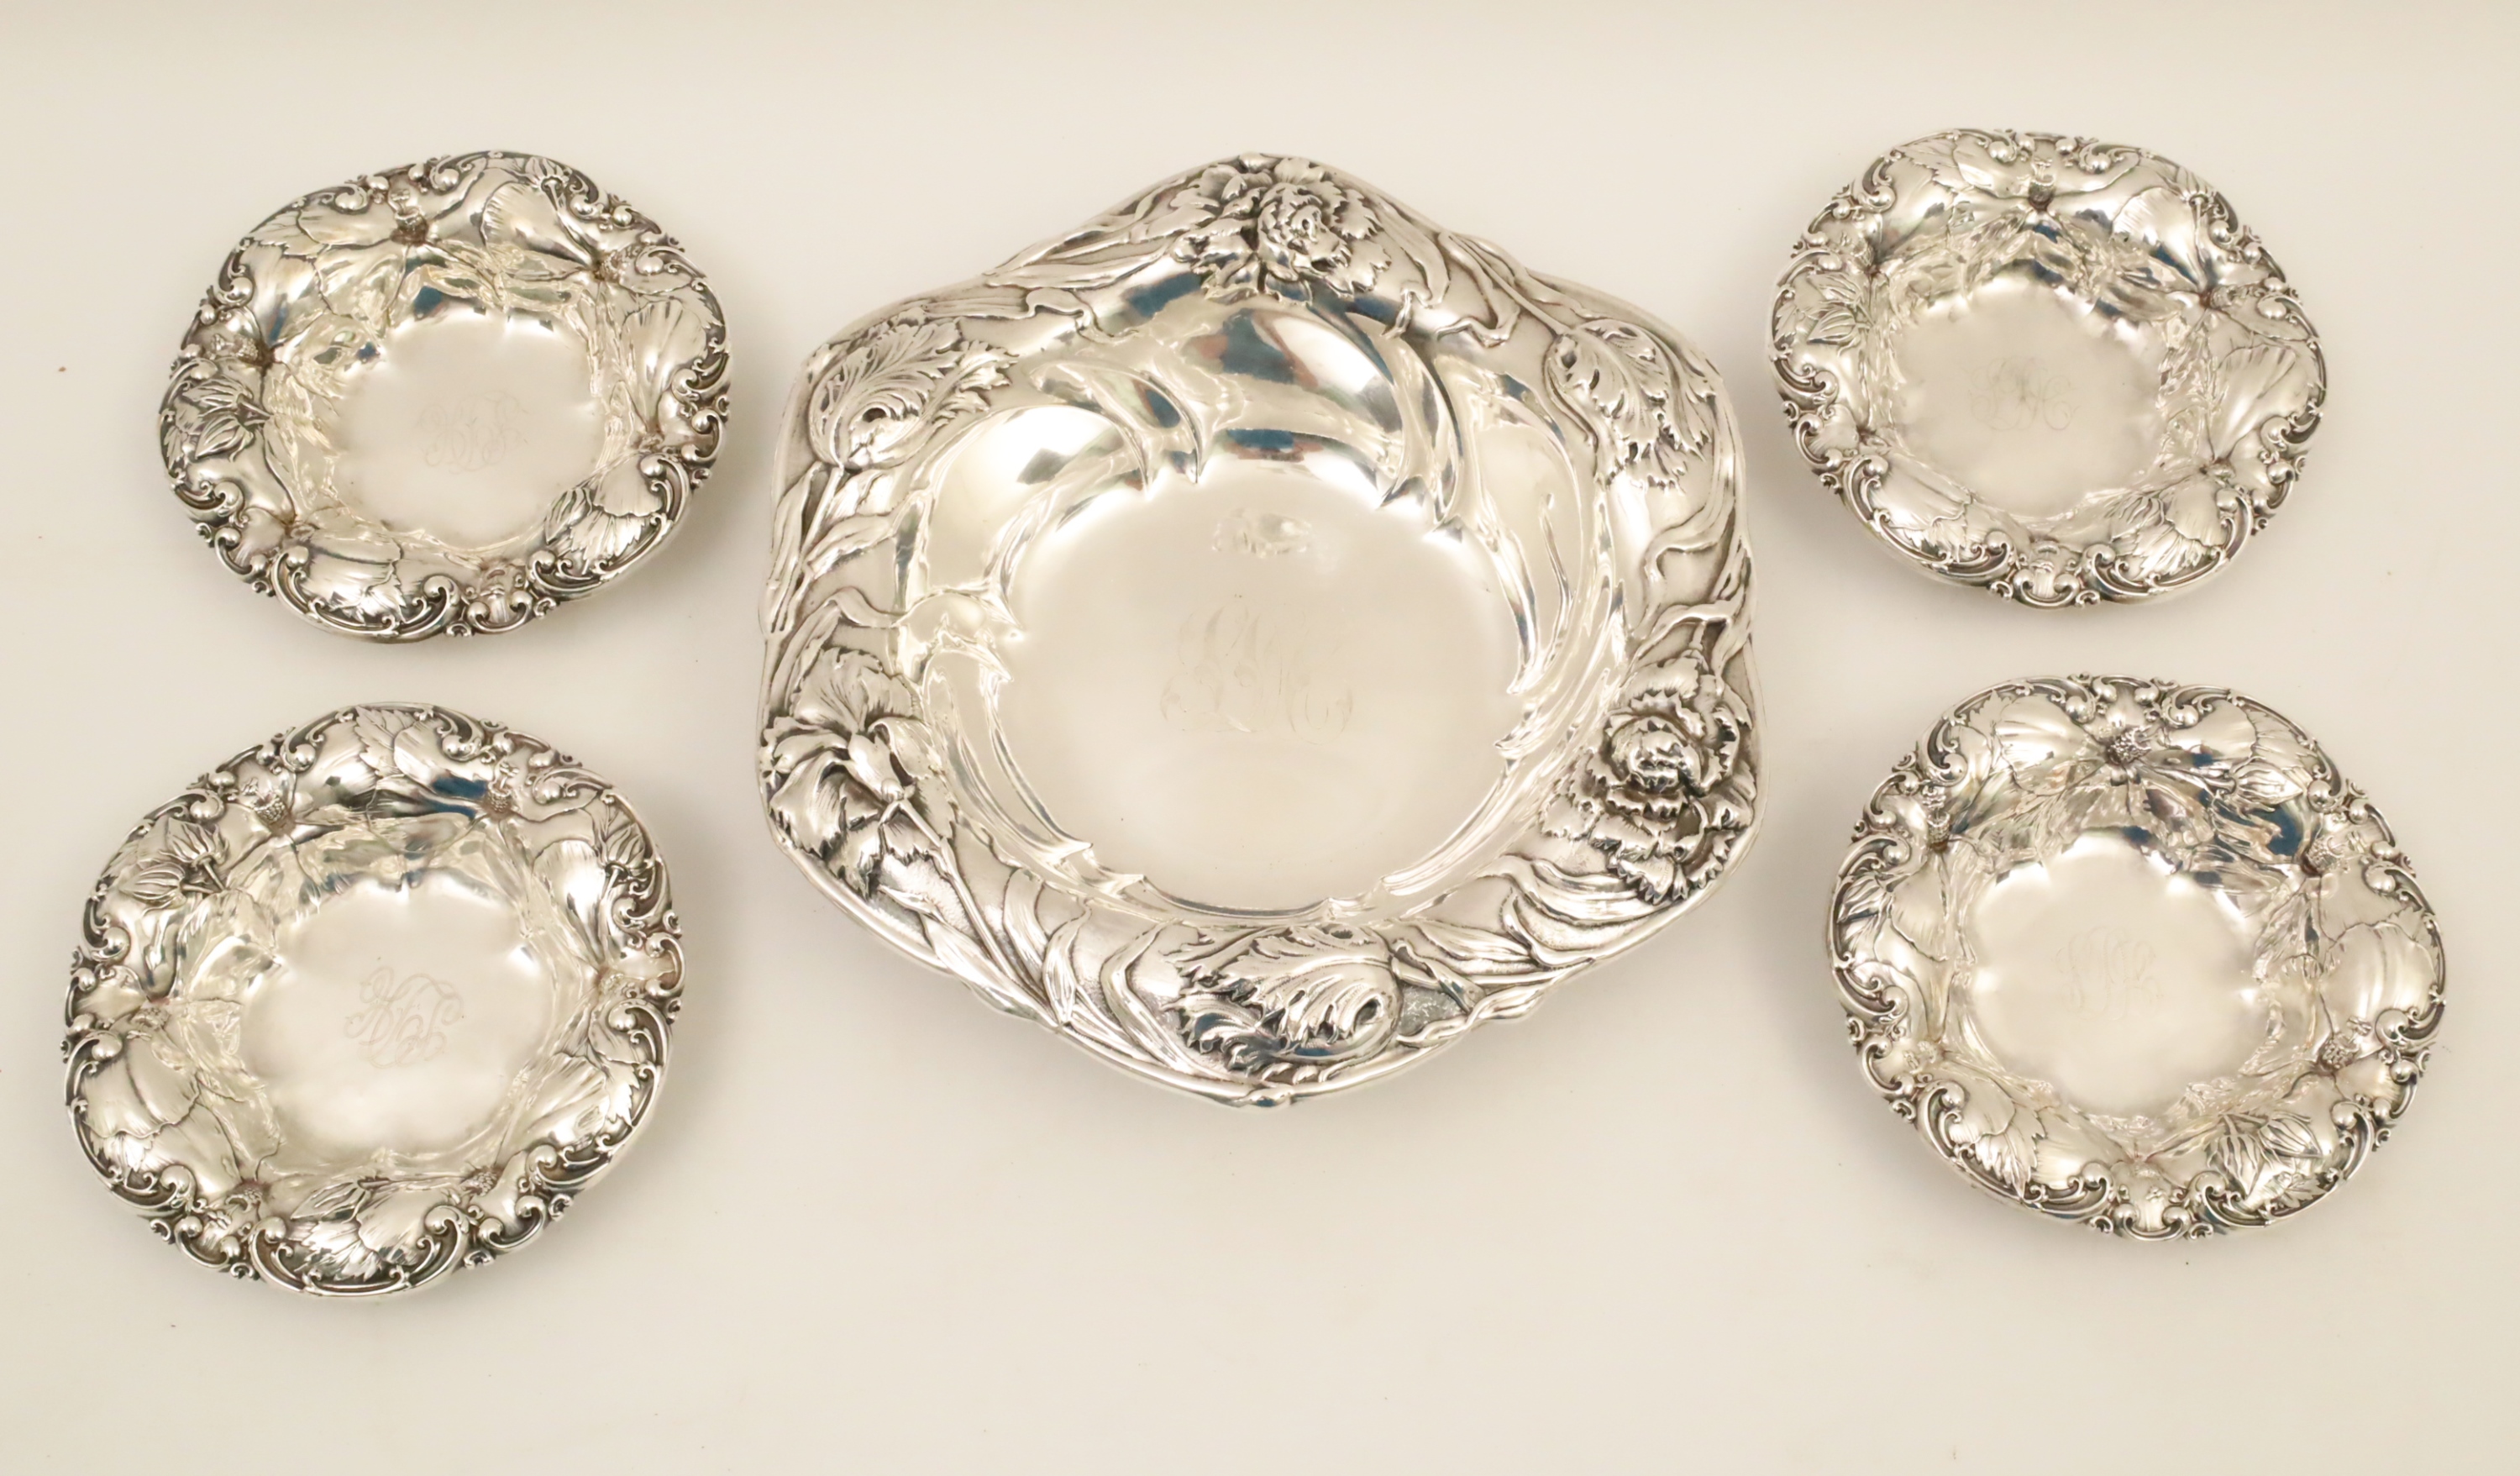 GROUP OF 5 STERLING SILVER BOWLS;